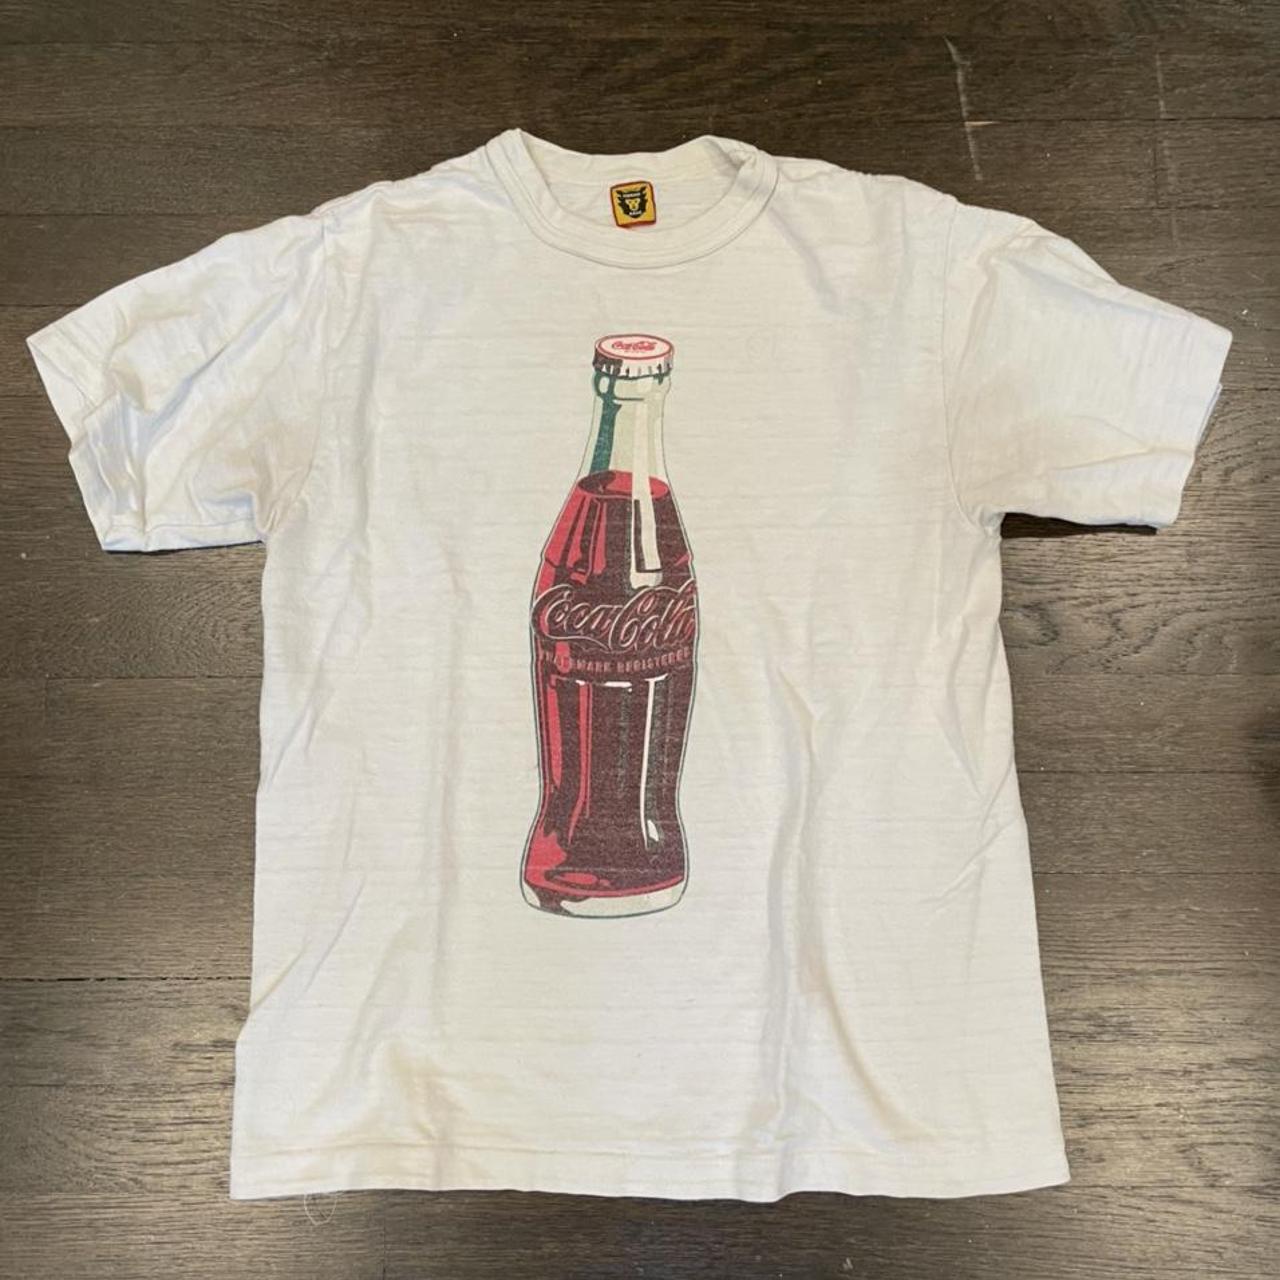 Human Made Men's White and Red T-shirt